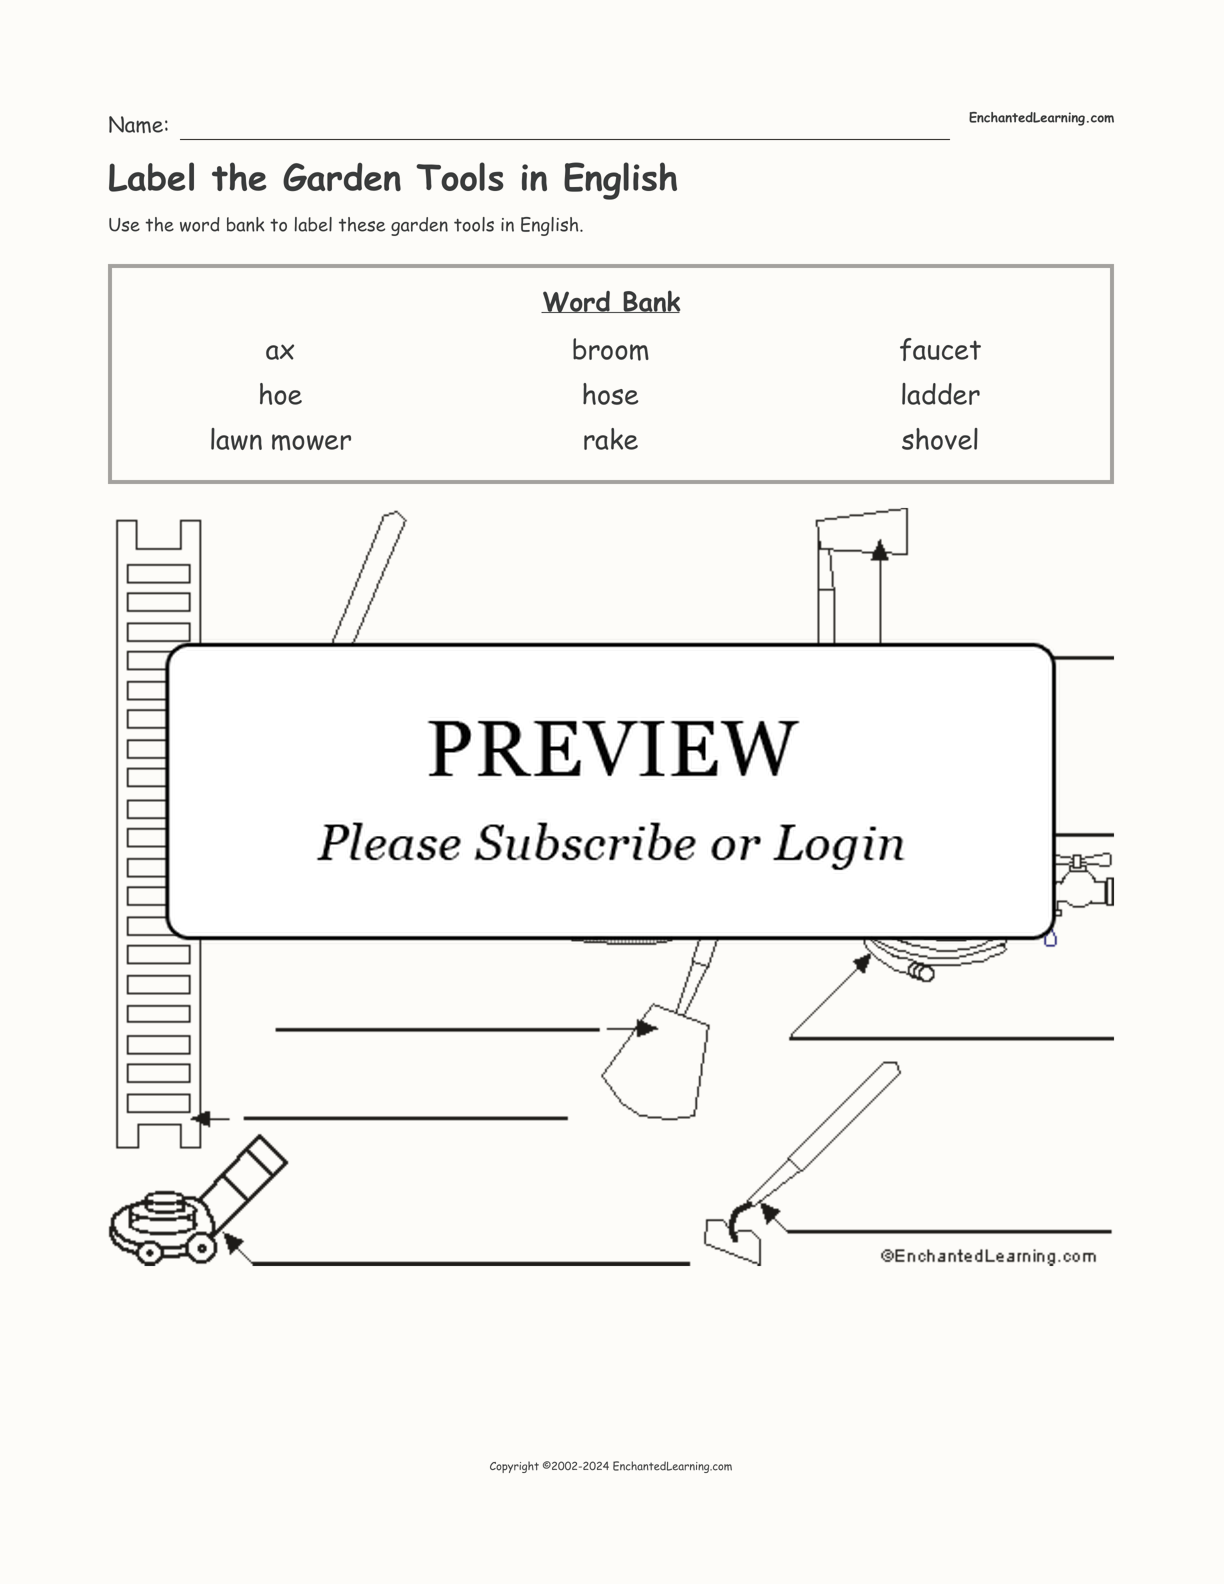 Label the Garden Tools in English interactive worksheet page 1